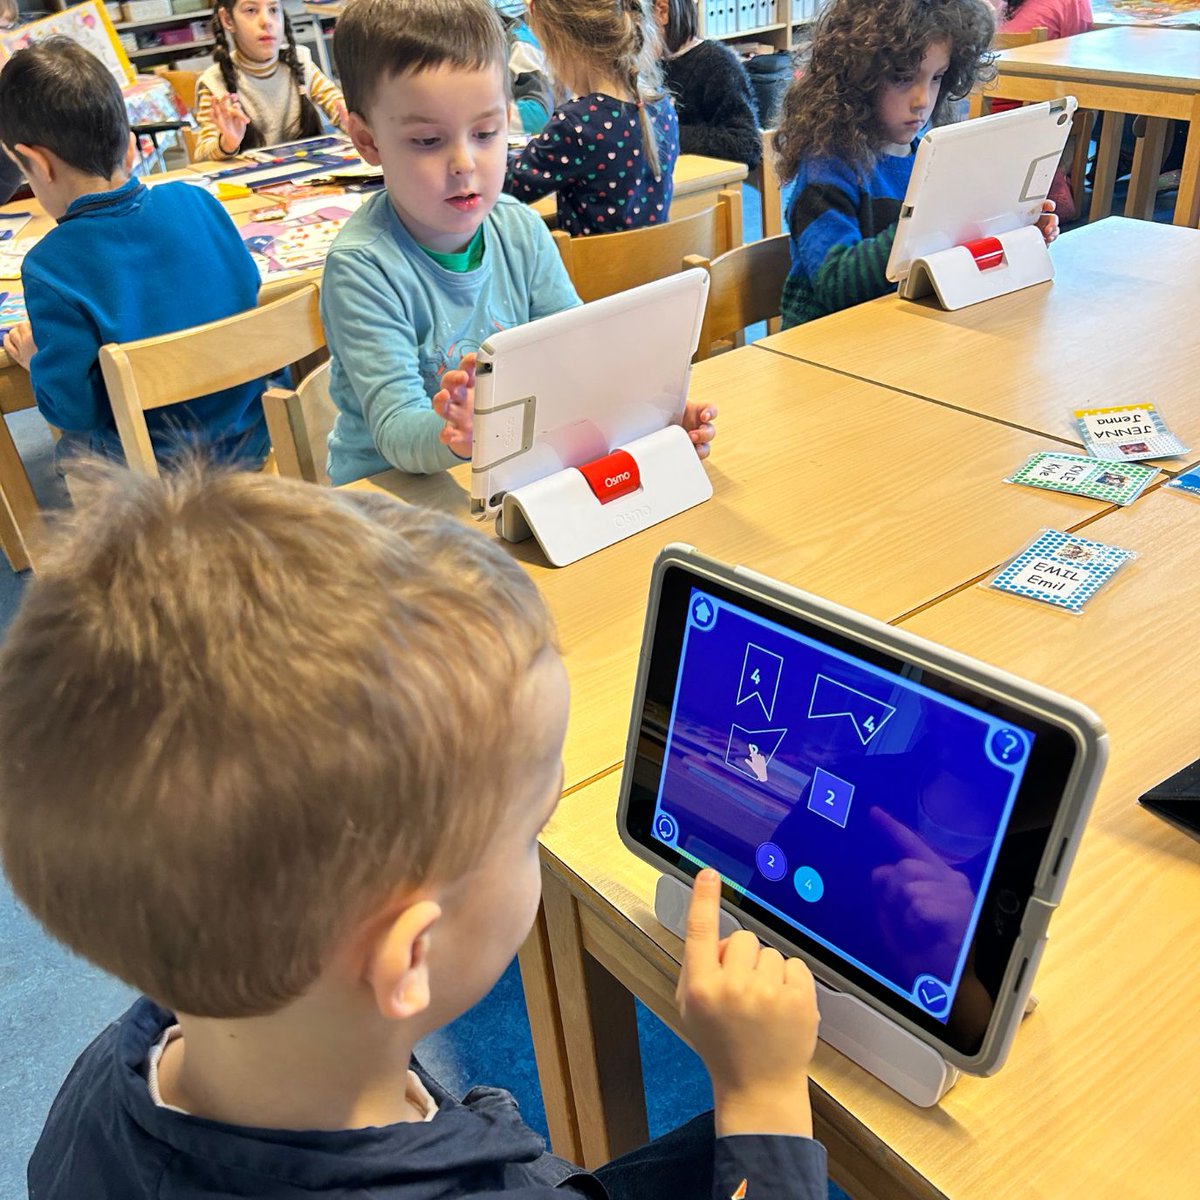 Check out Magrid, a transformative tool for kids with #dysgraphia! 🚀

👀 Learn visually with less handwriting
⚙️ Customize settings for better accessibility
✅ Get instant feedback to learn faster
🎮 Enjoy fun, gamified activities
🤲 Boost motor skills to improve #handwriting